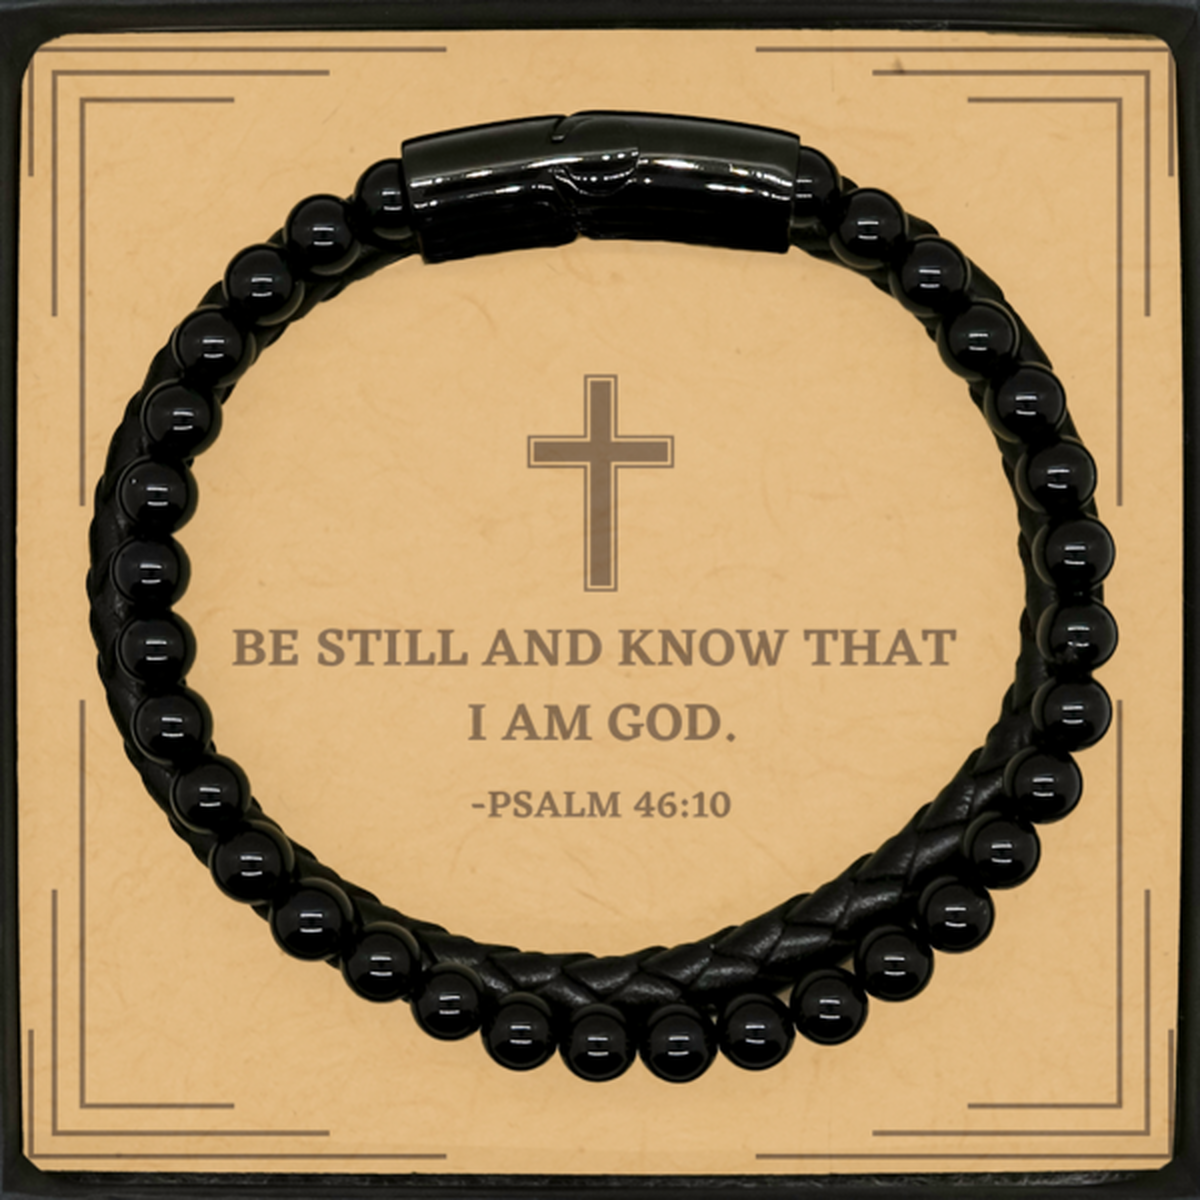 Baptism Gifts For Teenage Boys Girls, Christian Bible Verse Stone Leather Bracelet, Be still and know that I am god, Confirmation Gifts, Bible Verse Card for Son, Godson, Grandson